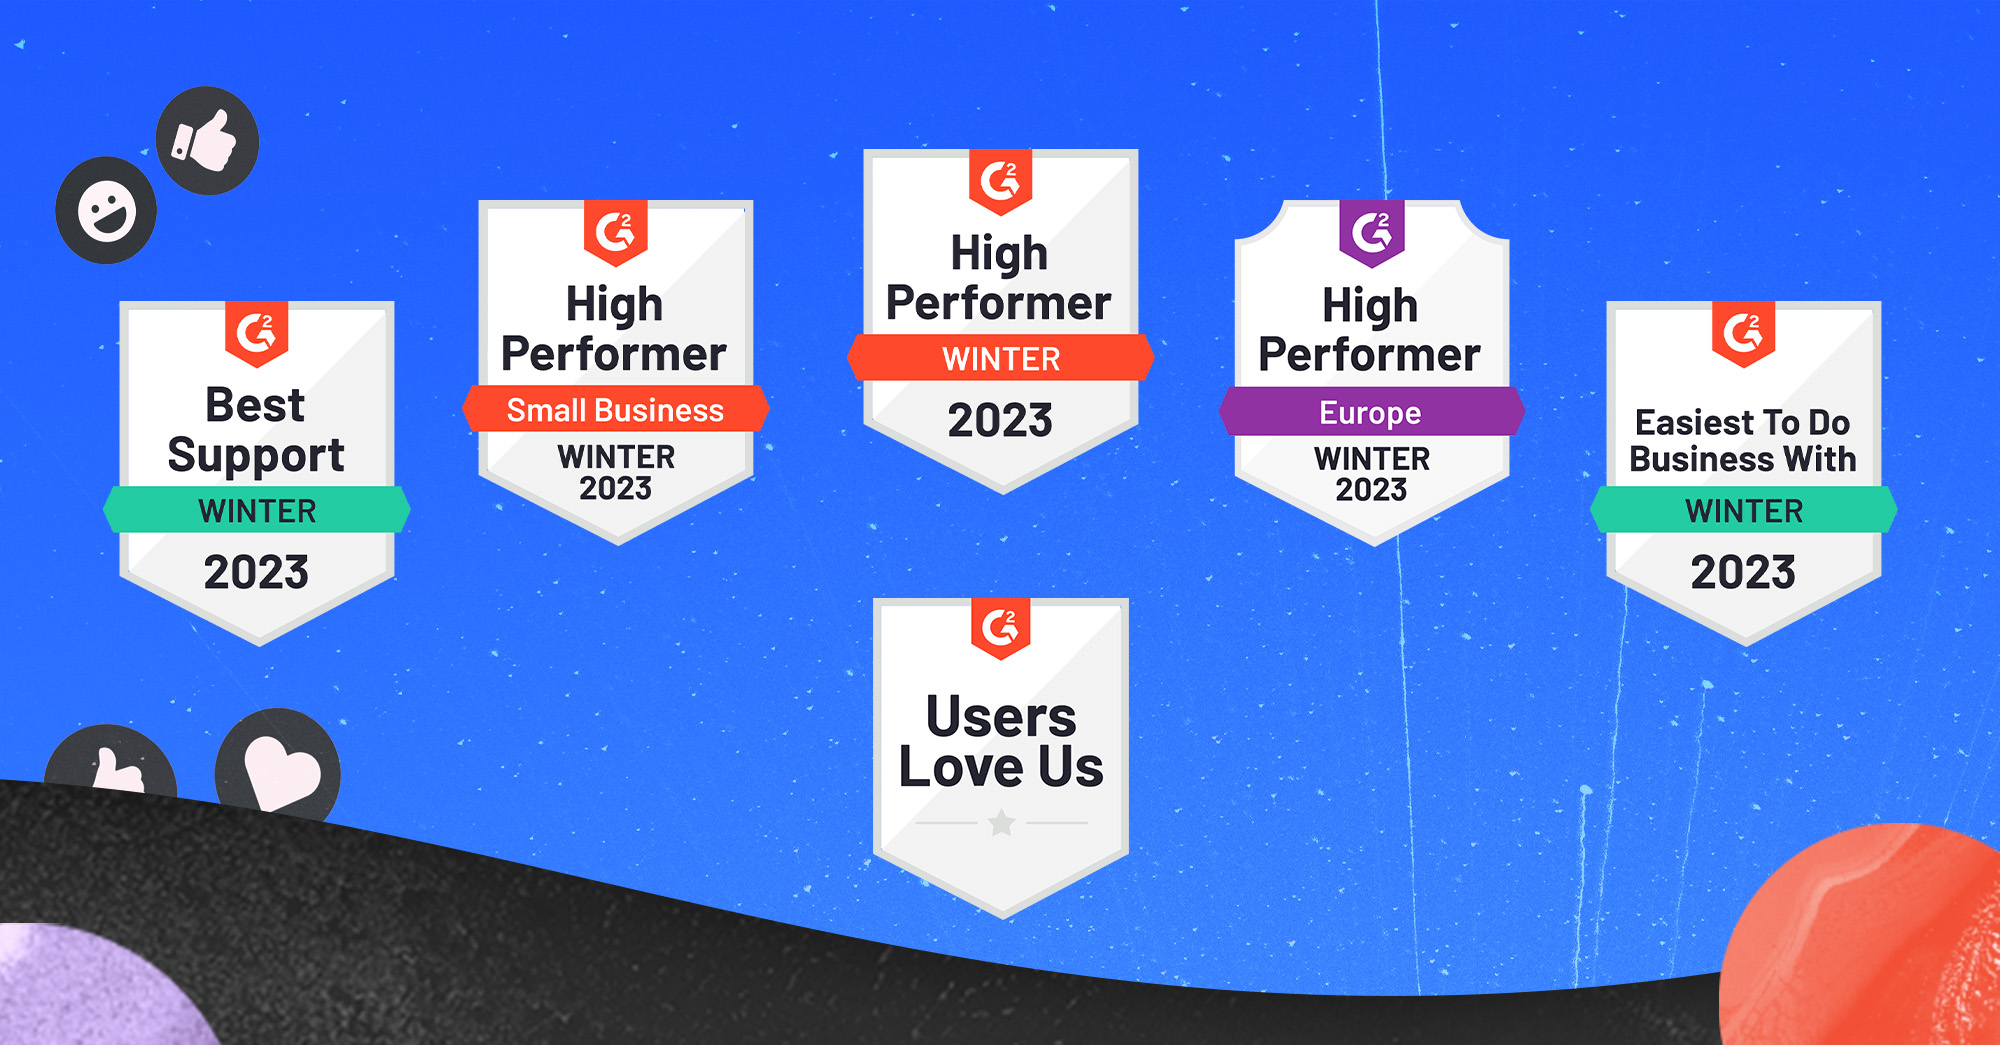 Recently, Univid was recognized as a "High Performer" in the Webinar category for G2's Winter 2023 report. Also, Univid was awarded "Best Support", "Easiest To Do Business With" in the Webinar Software category, and received the "Users Love Us" badge.